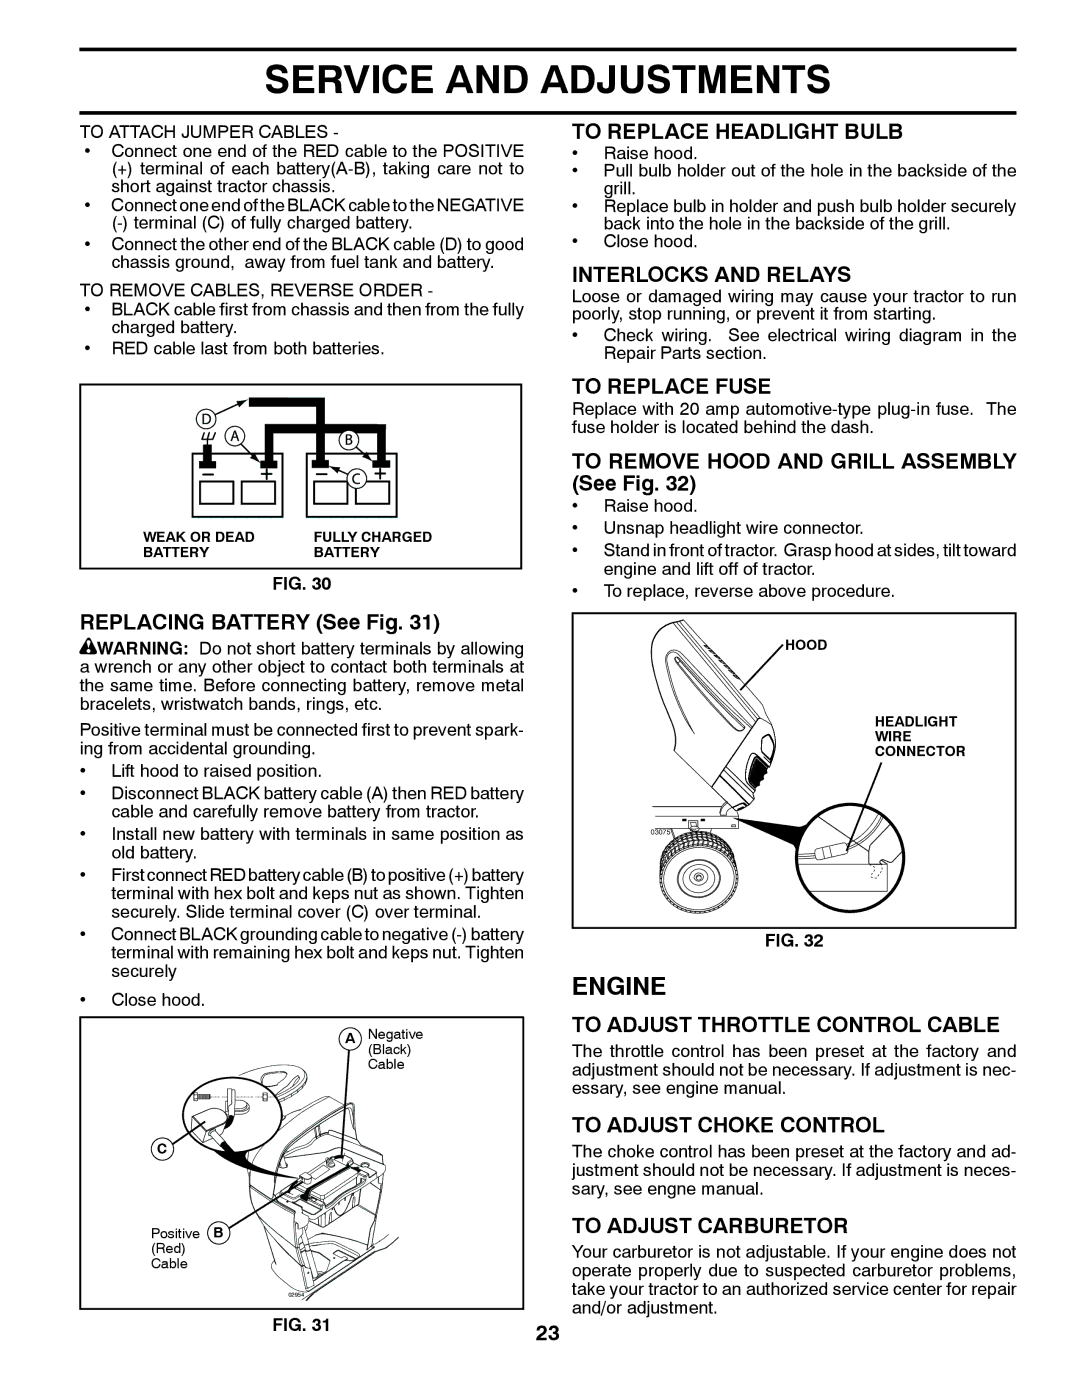 Poulan 411259 manual To Replace Headlight Bulb, Interlocks and Relays, To Replace Fuse, To Adjust Throttle Control Cable 